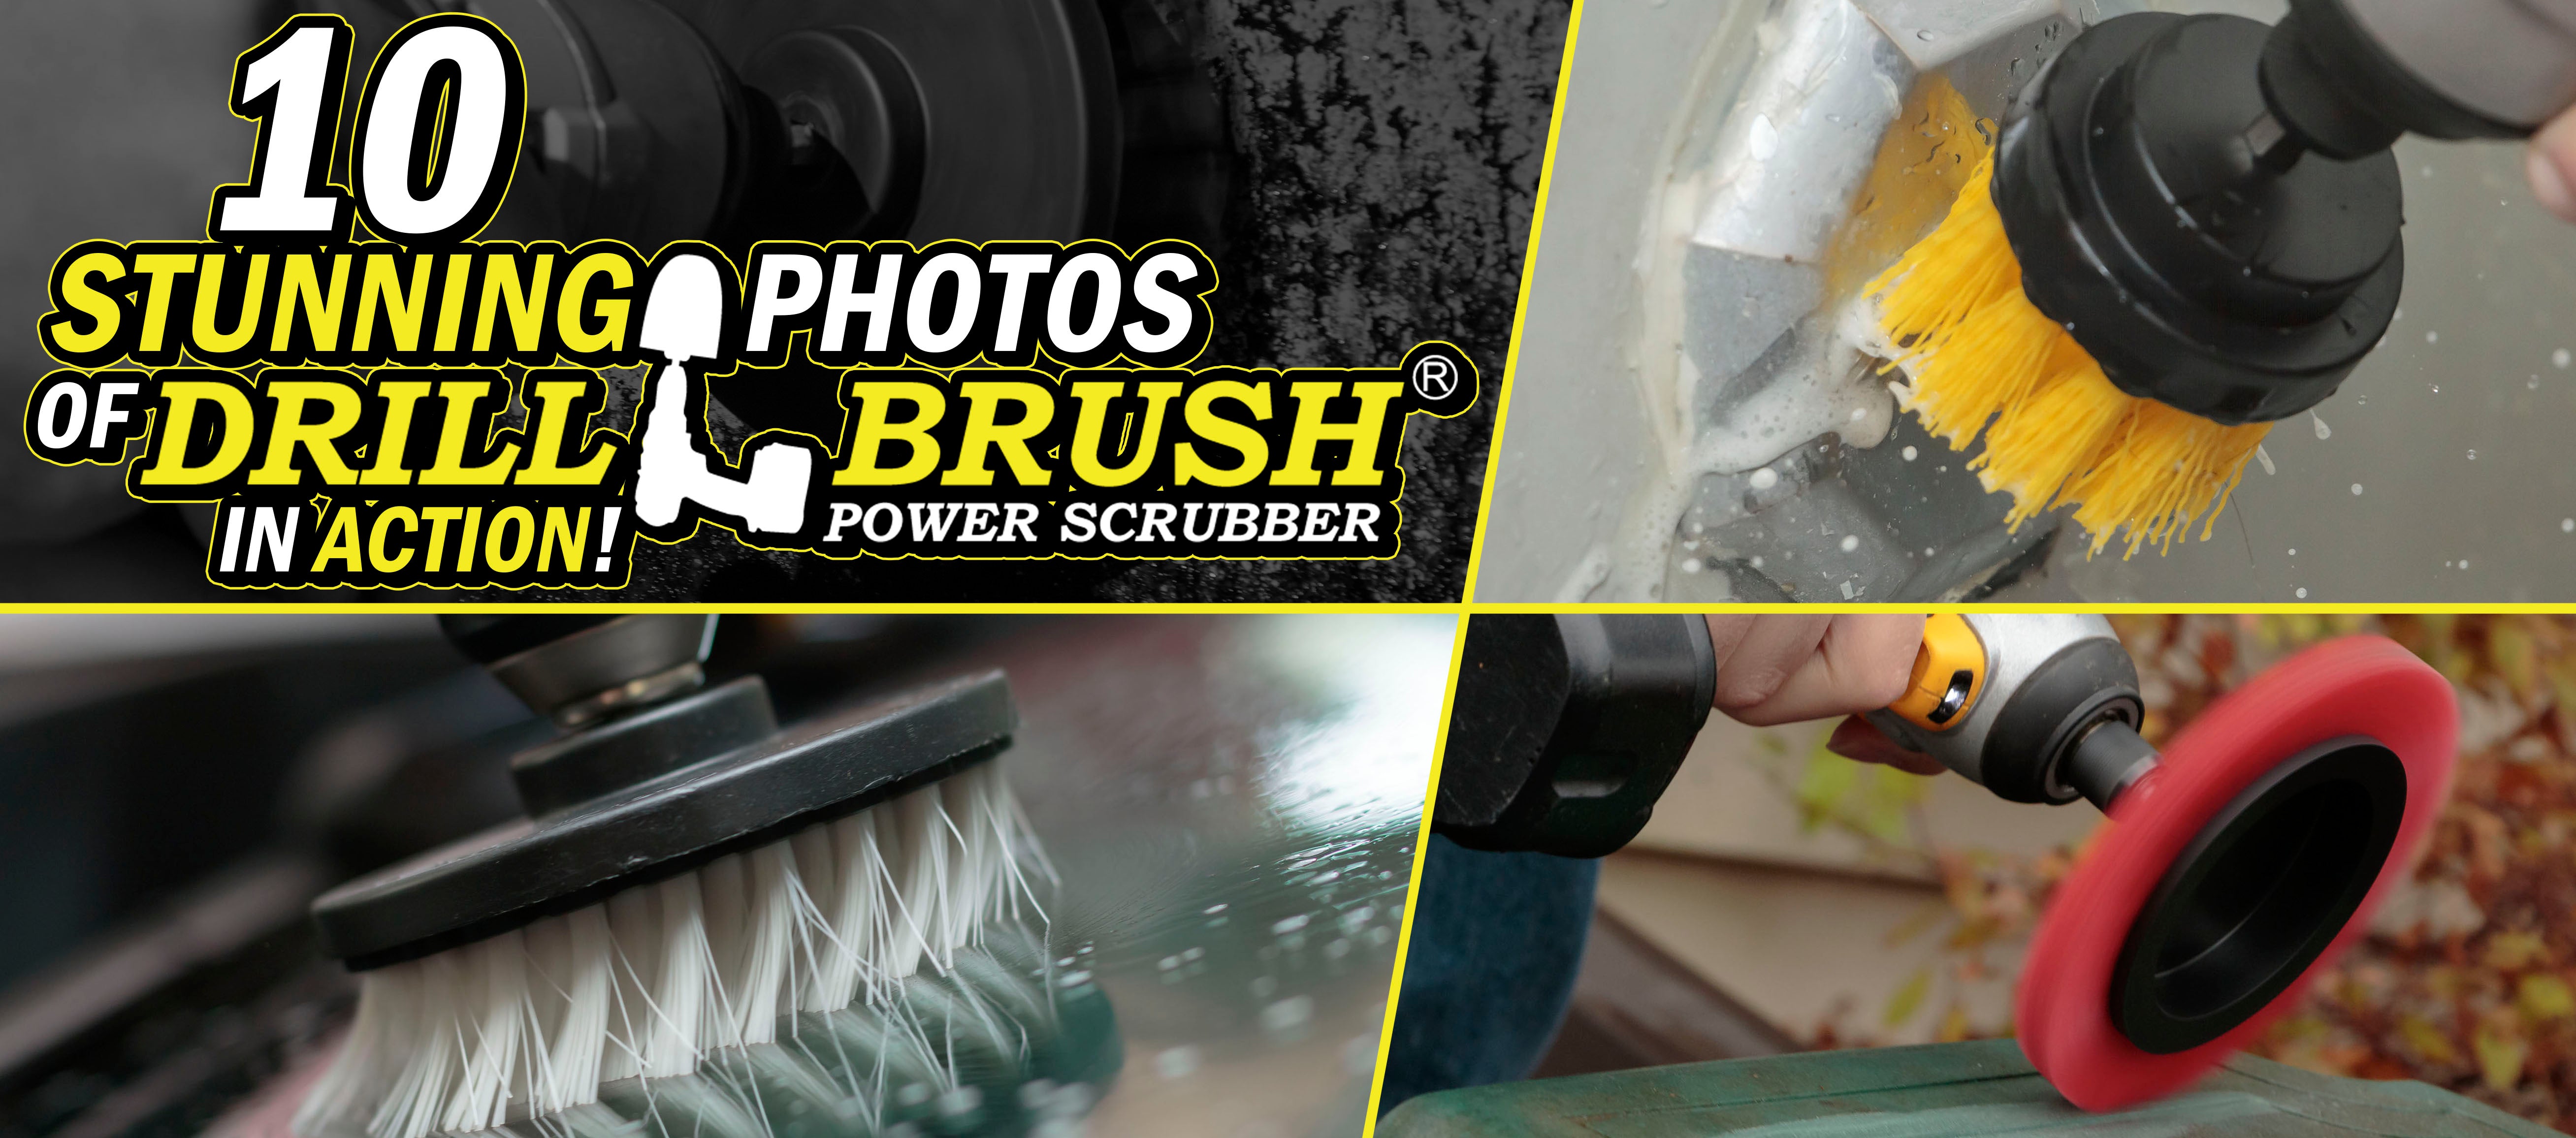 10 Stunning Photos of Drillbrush in Action That’ll Make You Want To Start Scrubbing!